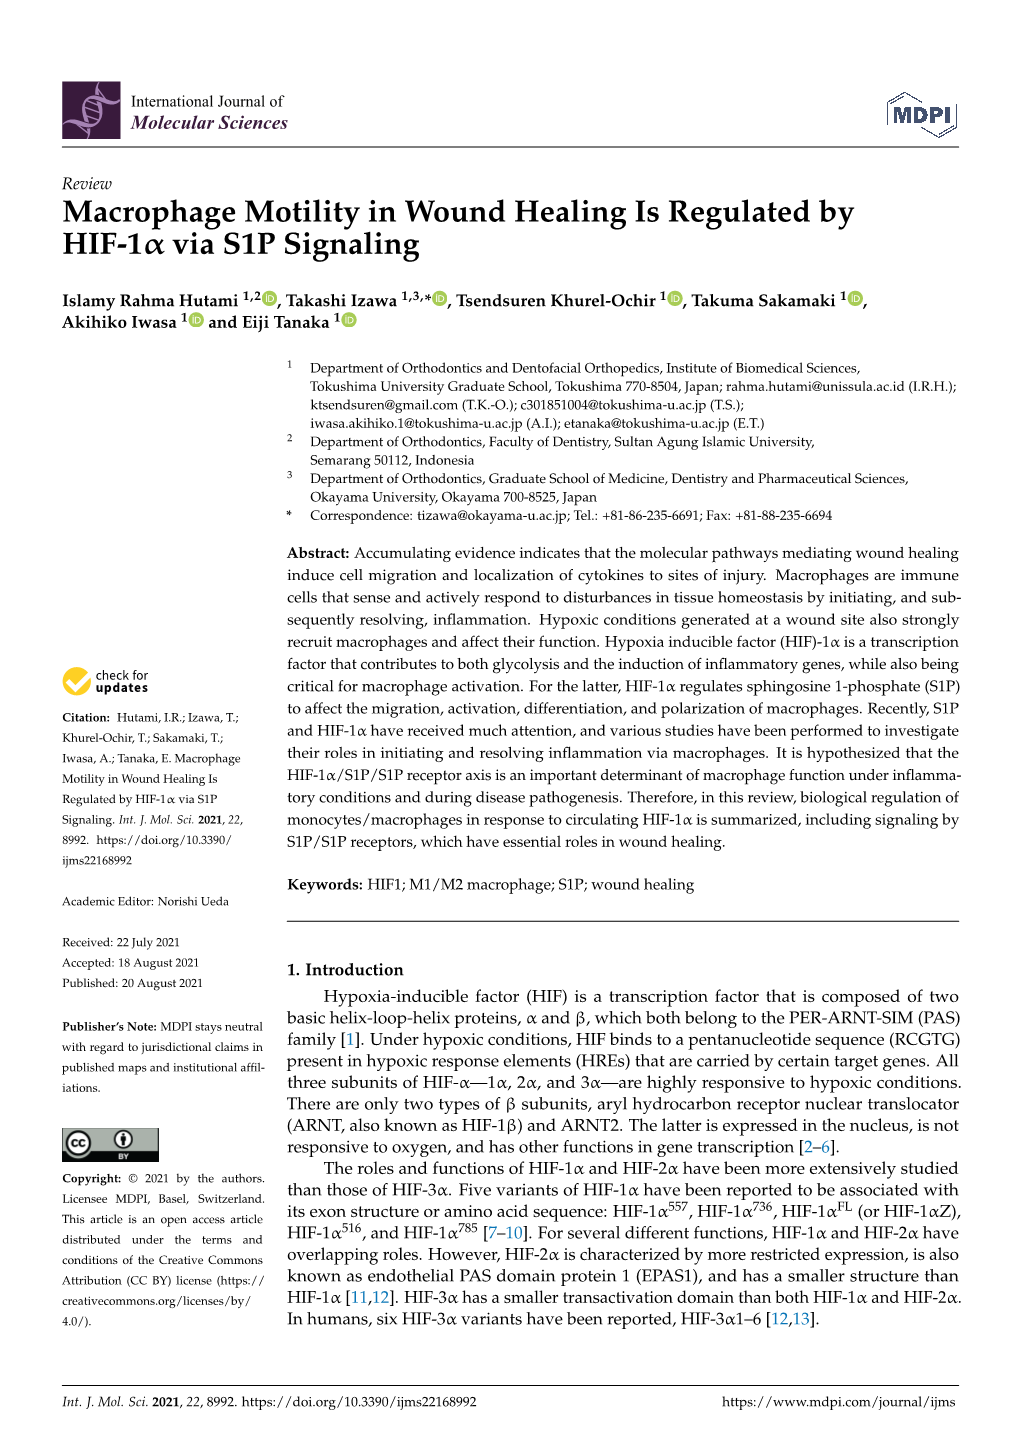 Macrophage Motility in Wound Healing Is Regulated by HIF-1 Via